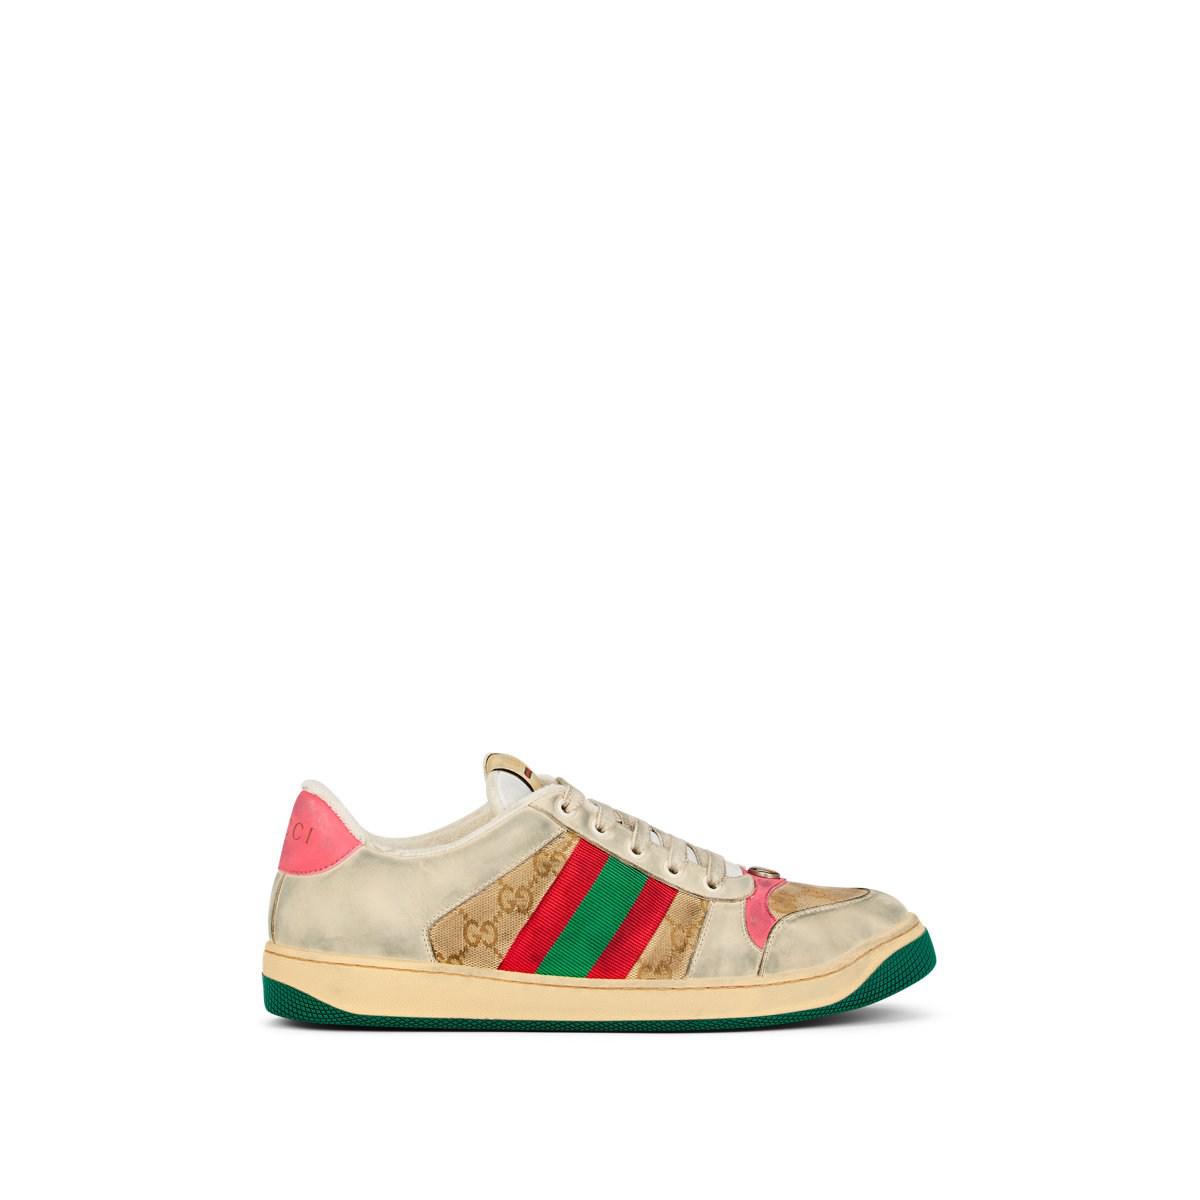 Gucci Leather & Canvas Sneakers in White for Men - Lyst